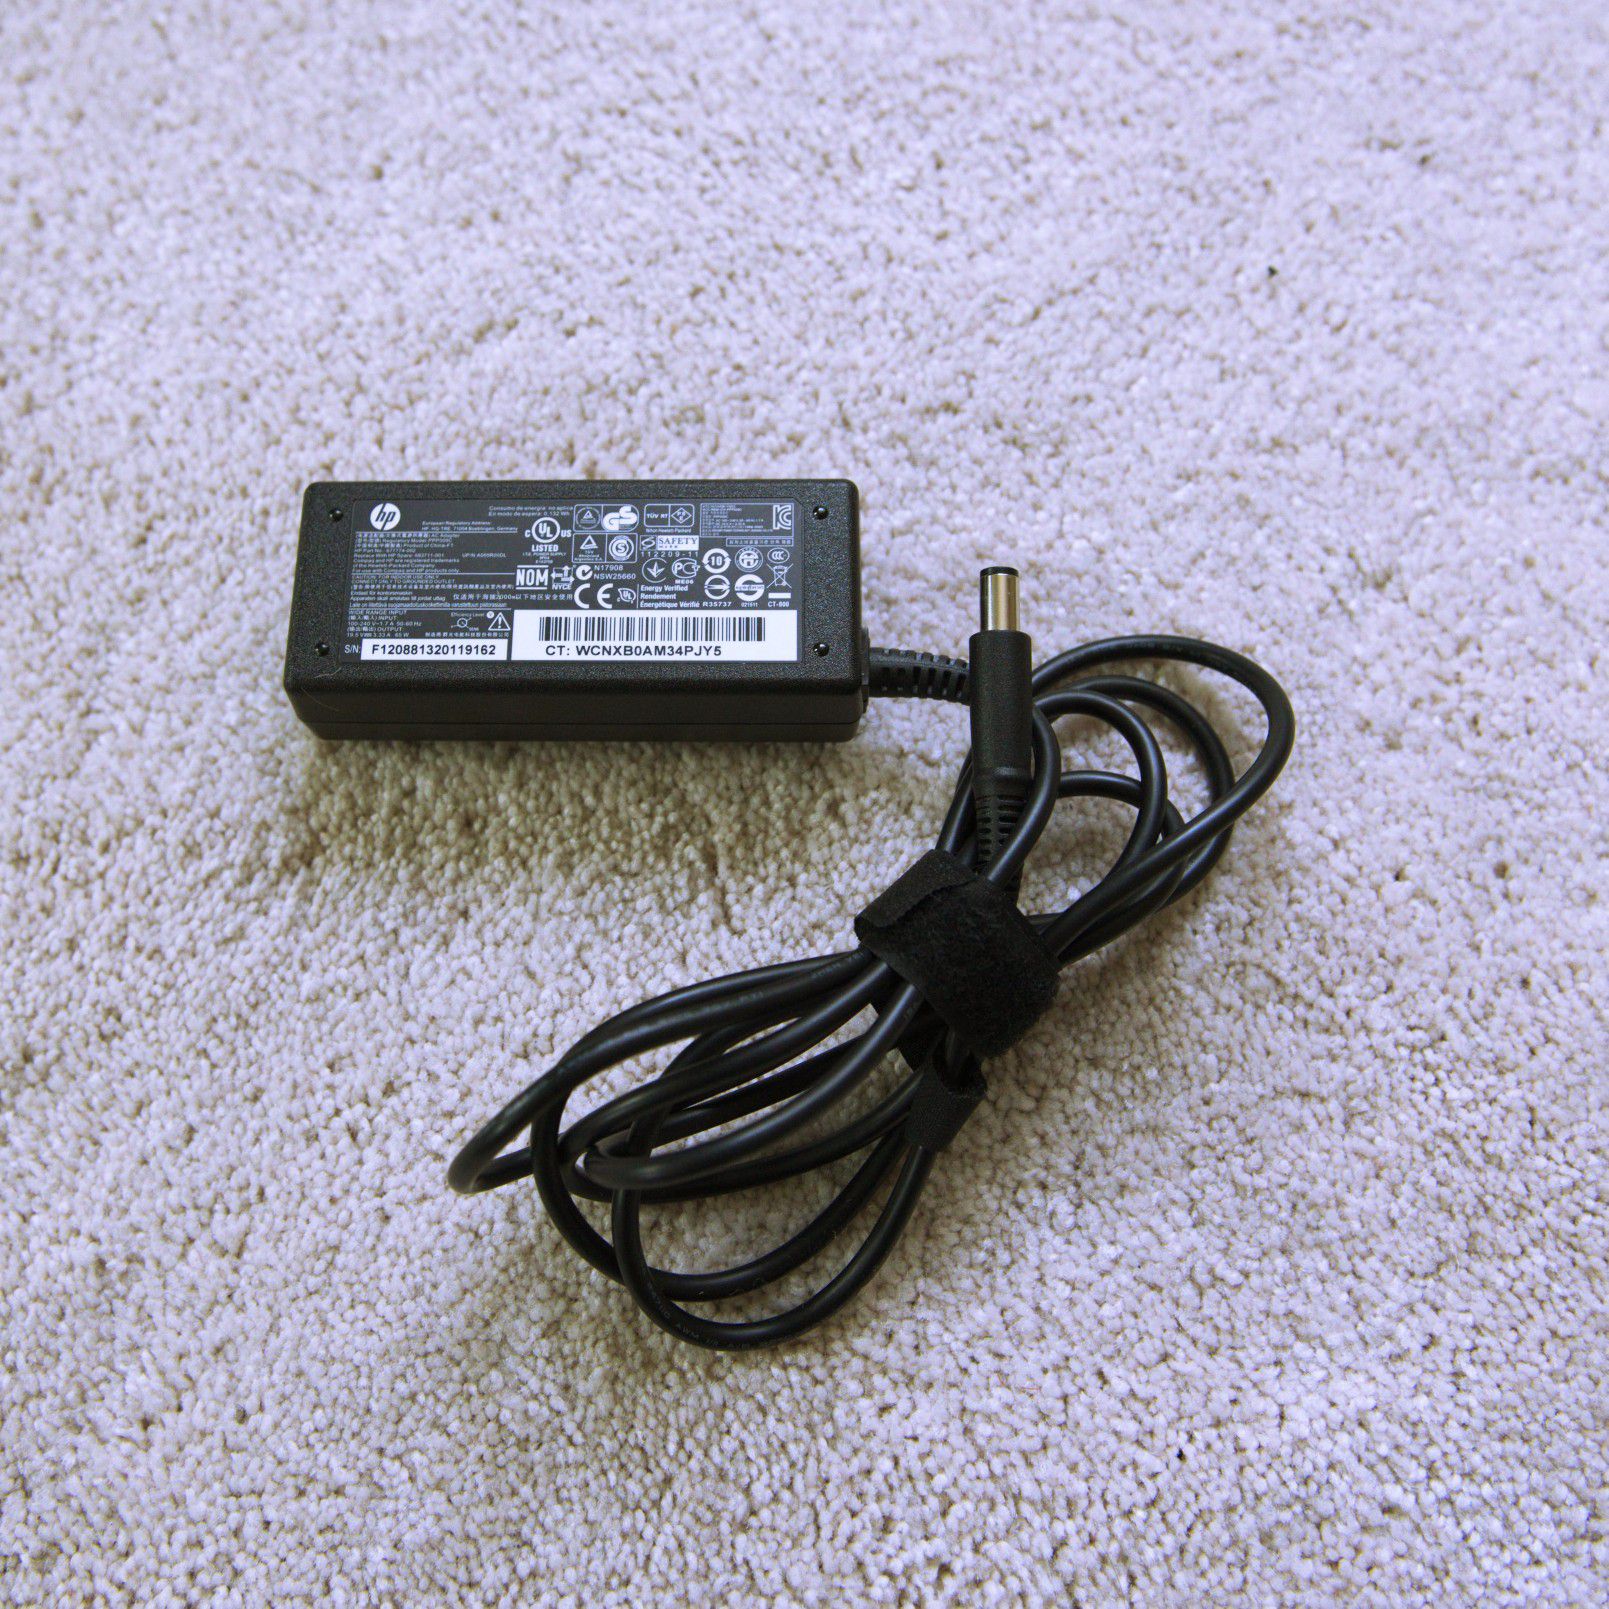 AC Adapter for HP/Compaq EliteBook 2530p, 2730p, 6930p with power cor